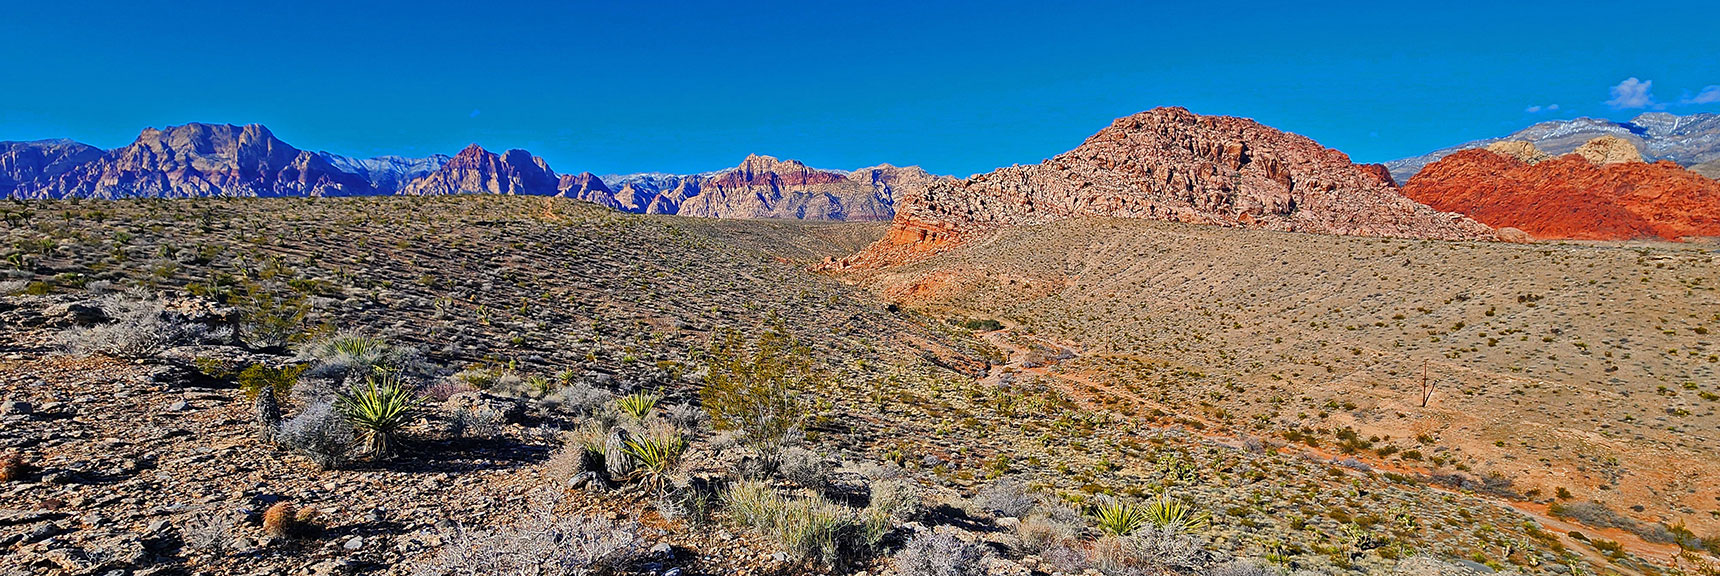 Freeway Trail View of Southeast Edge of Lower Calico Hills | Calico Basin Daily Workout Trails | Calico Basin, Nevada